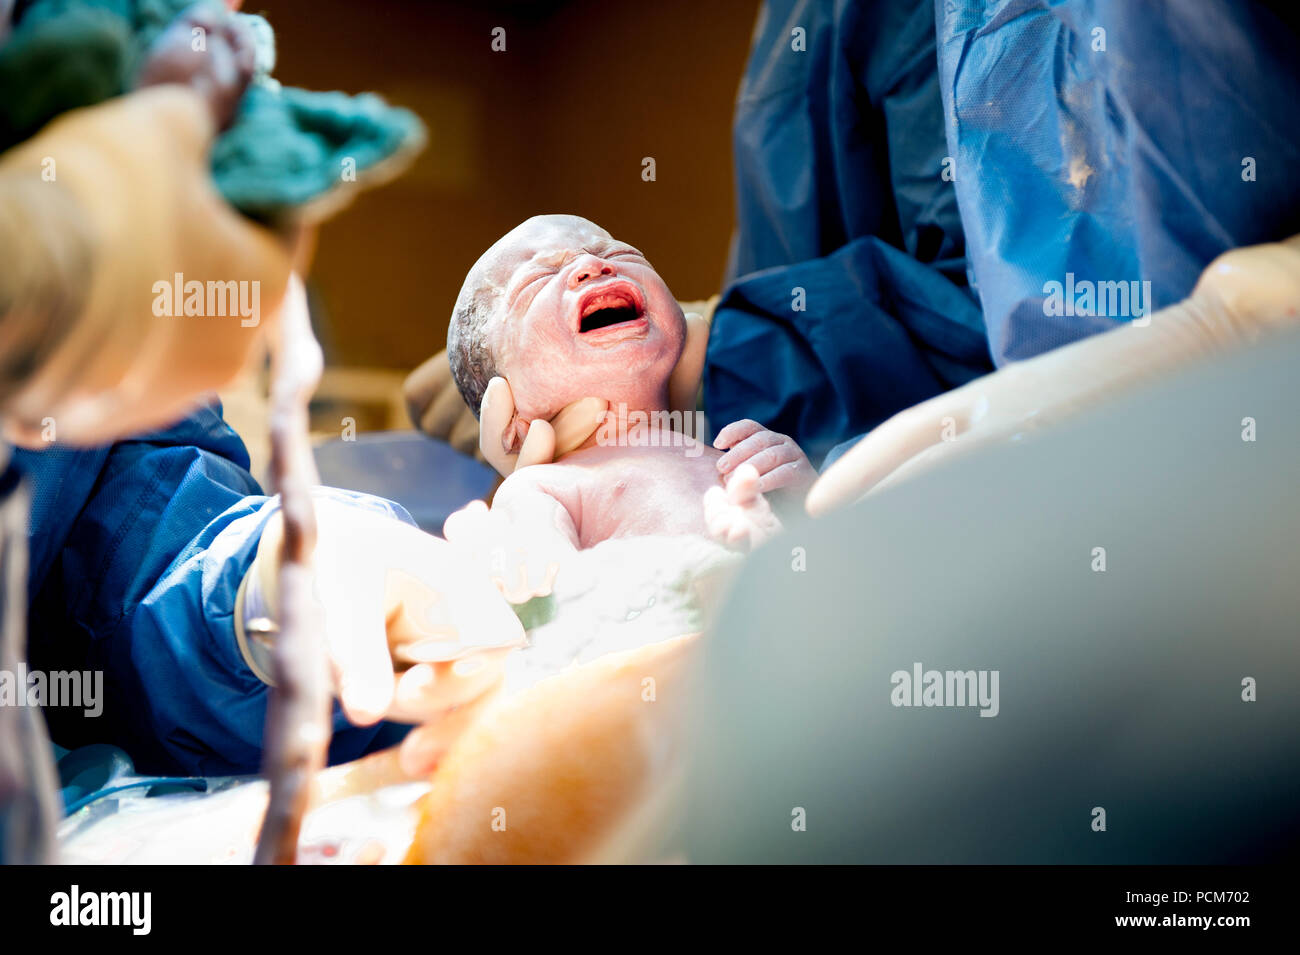 A woman giving birth to twins by caesarean section (Heverlee, 30/12/2016) Stock Photo